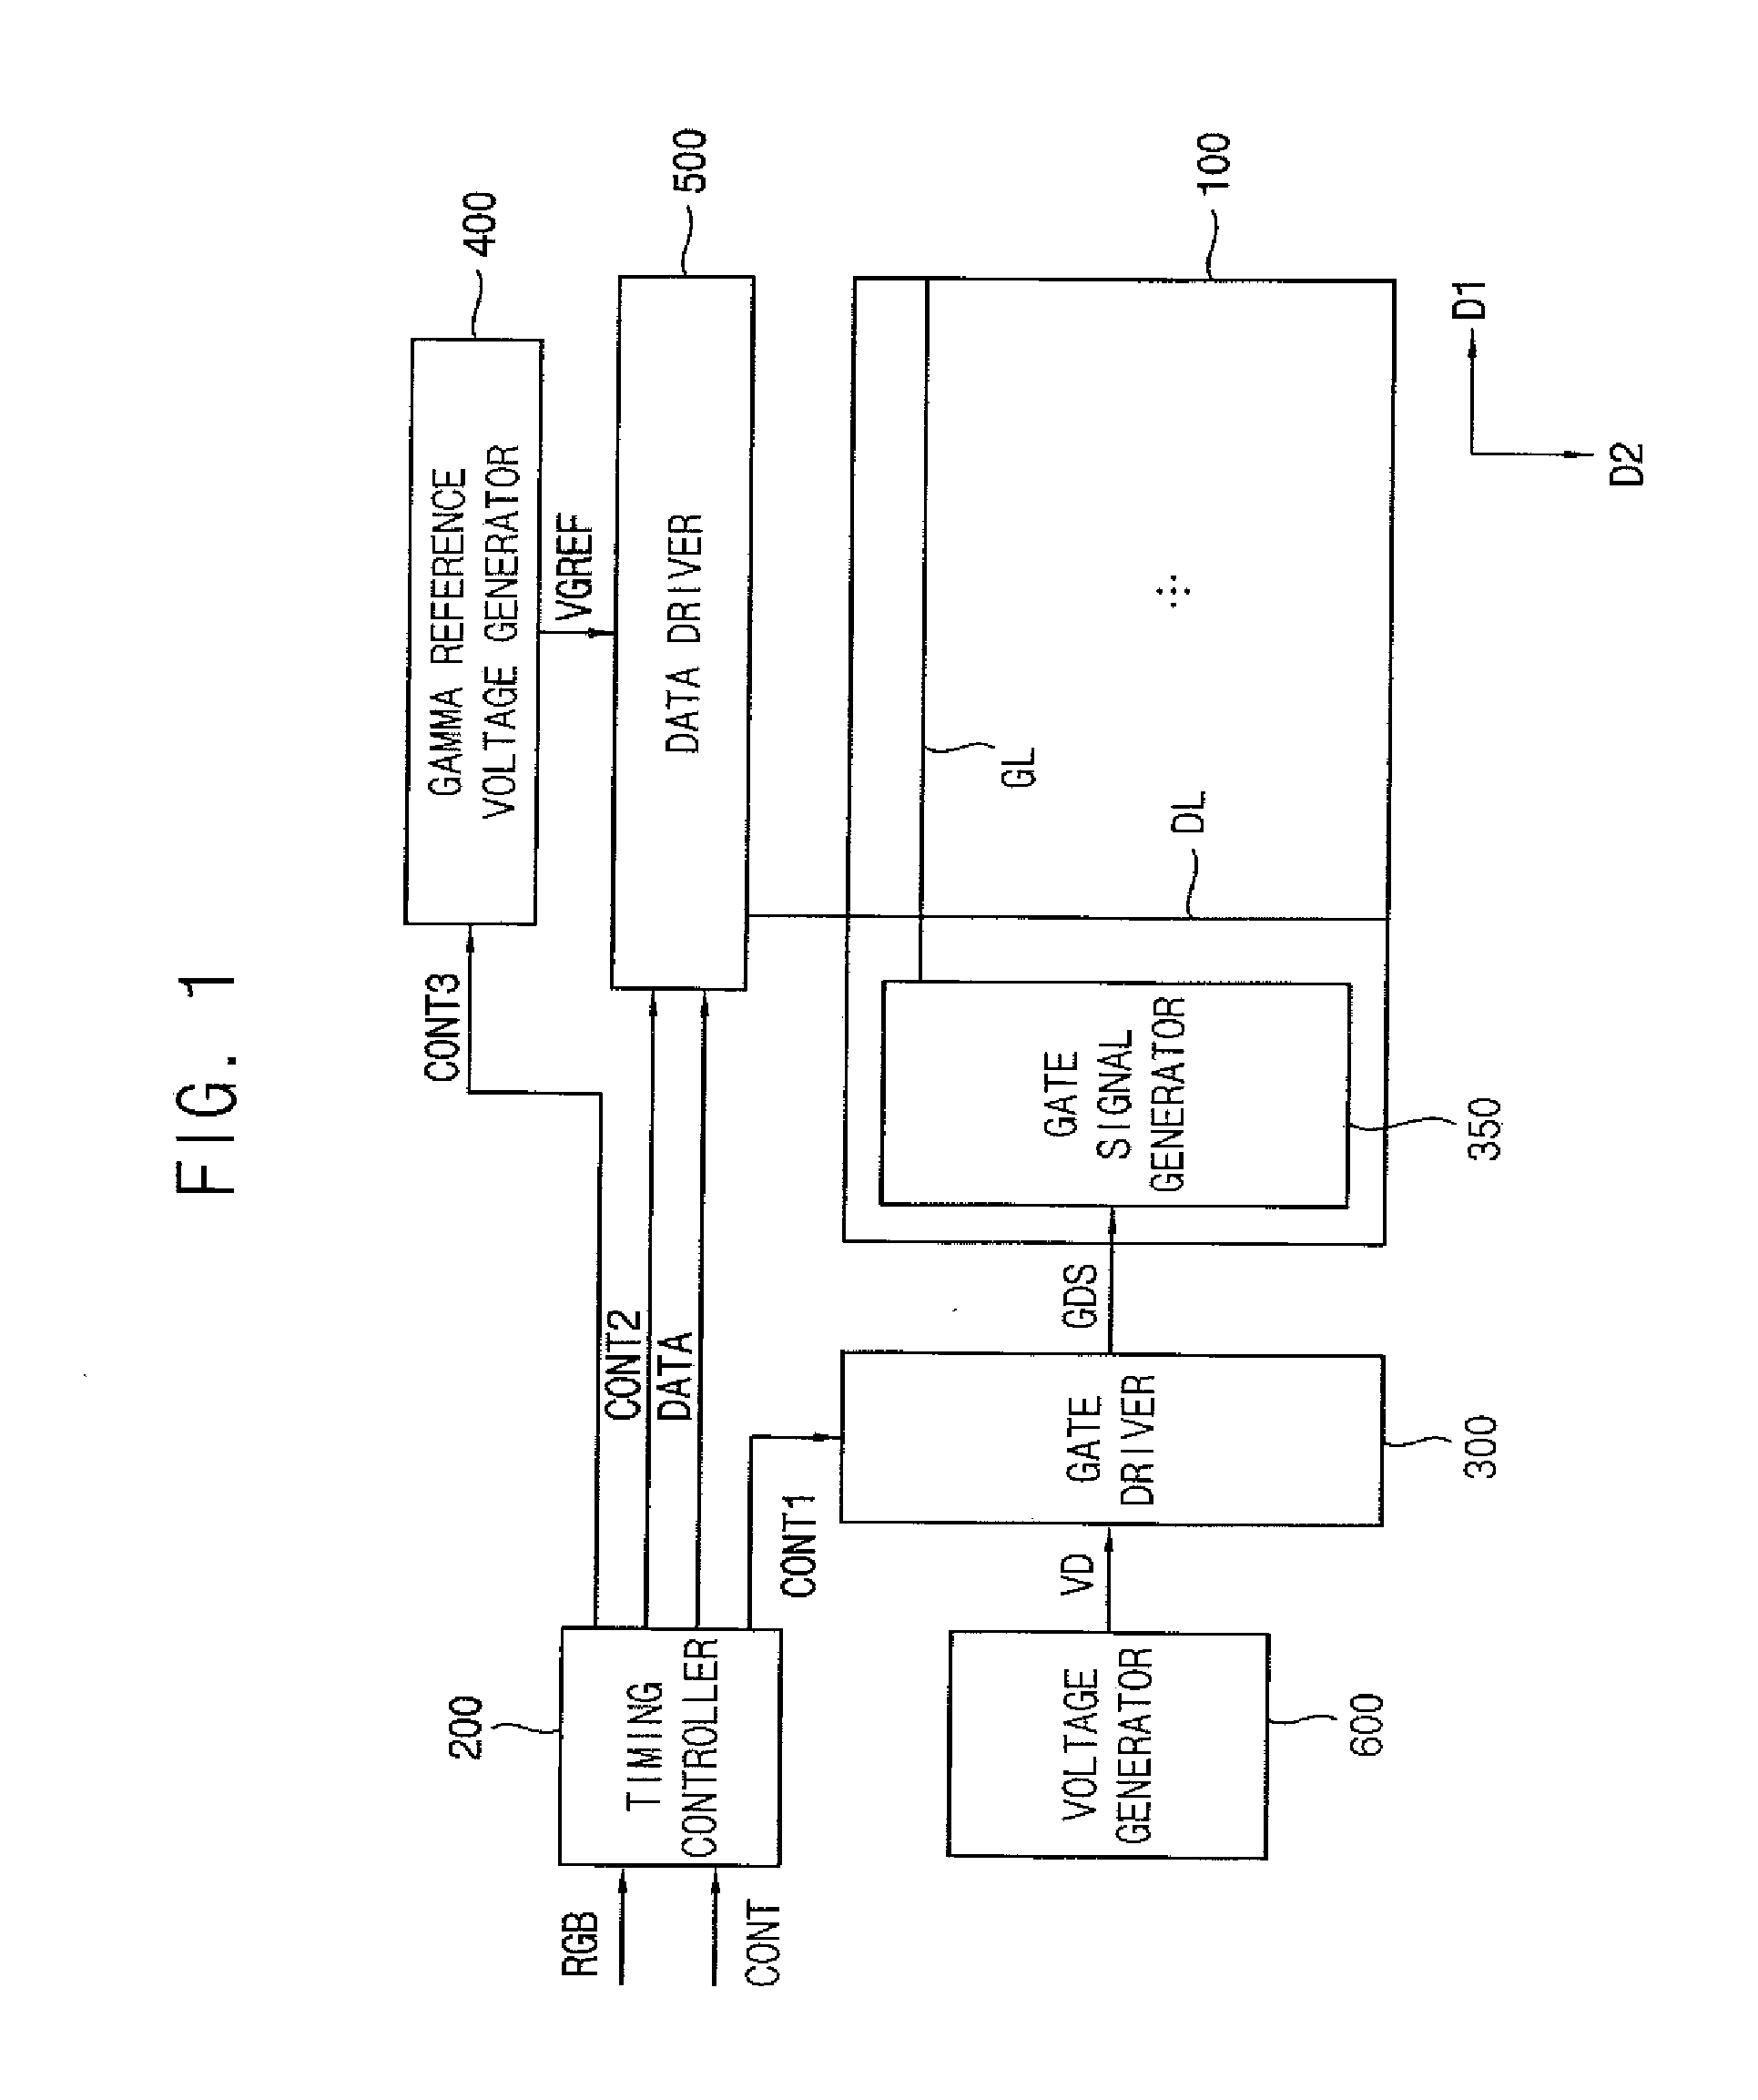 Gate driving module, display apparatus having the same and method of driving display panel using the same